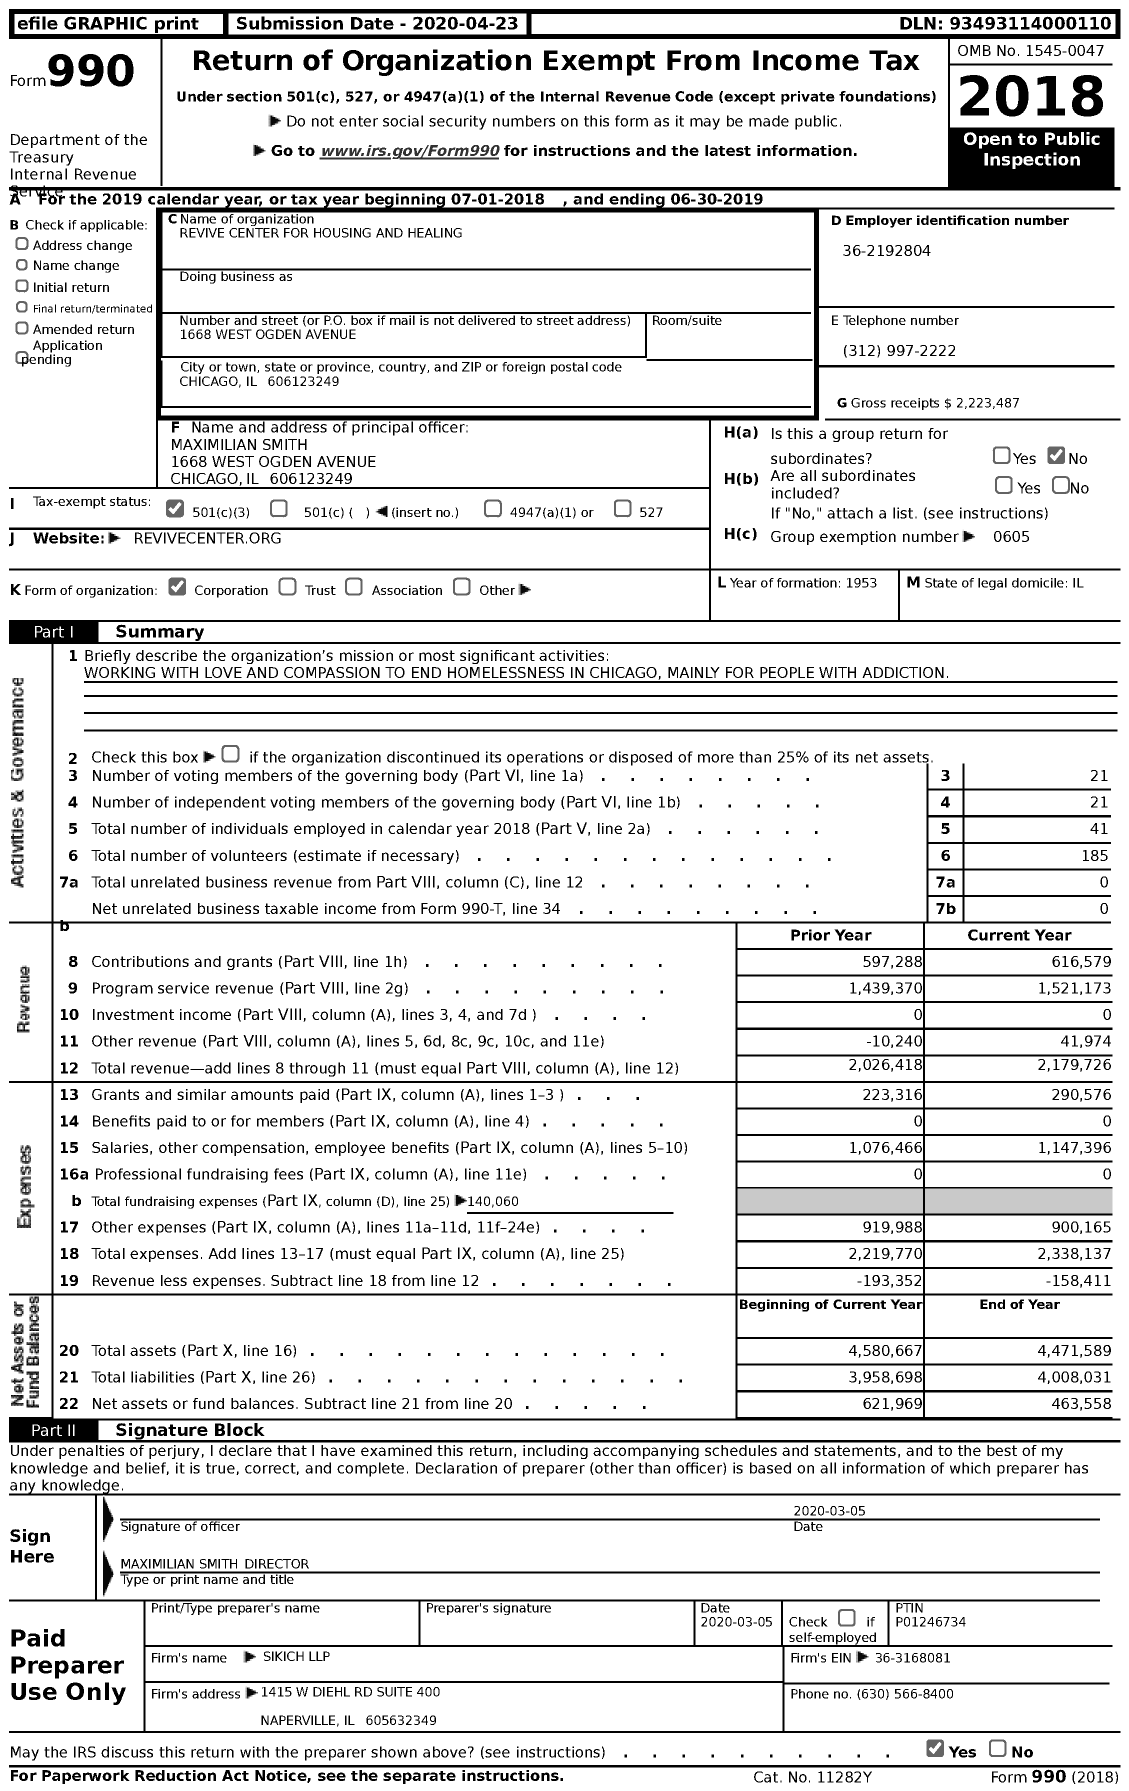 Image of first page of 2018 Form 990 for Revive Center for Housing and Healing